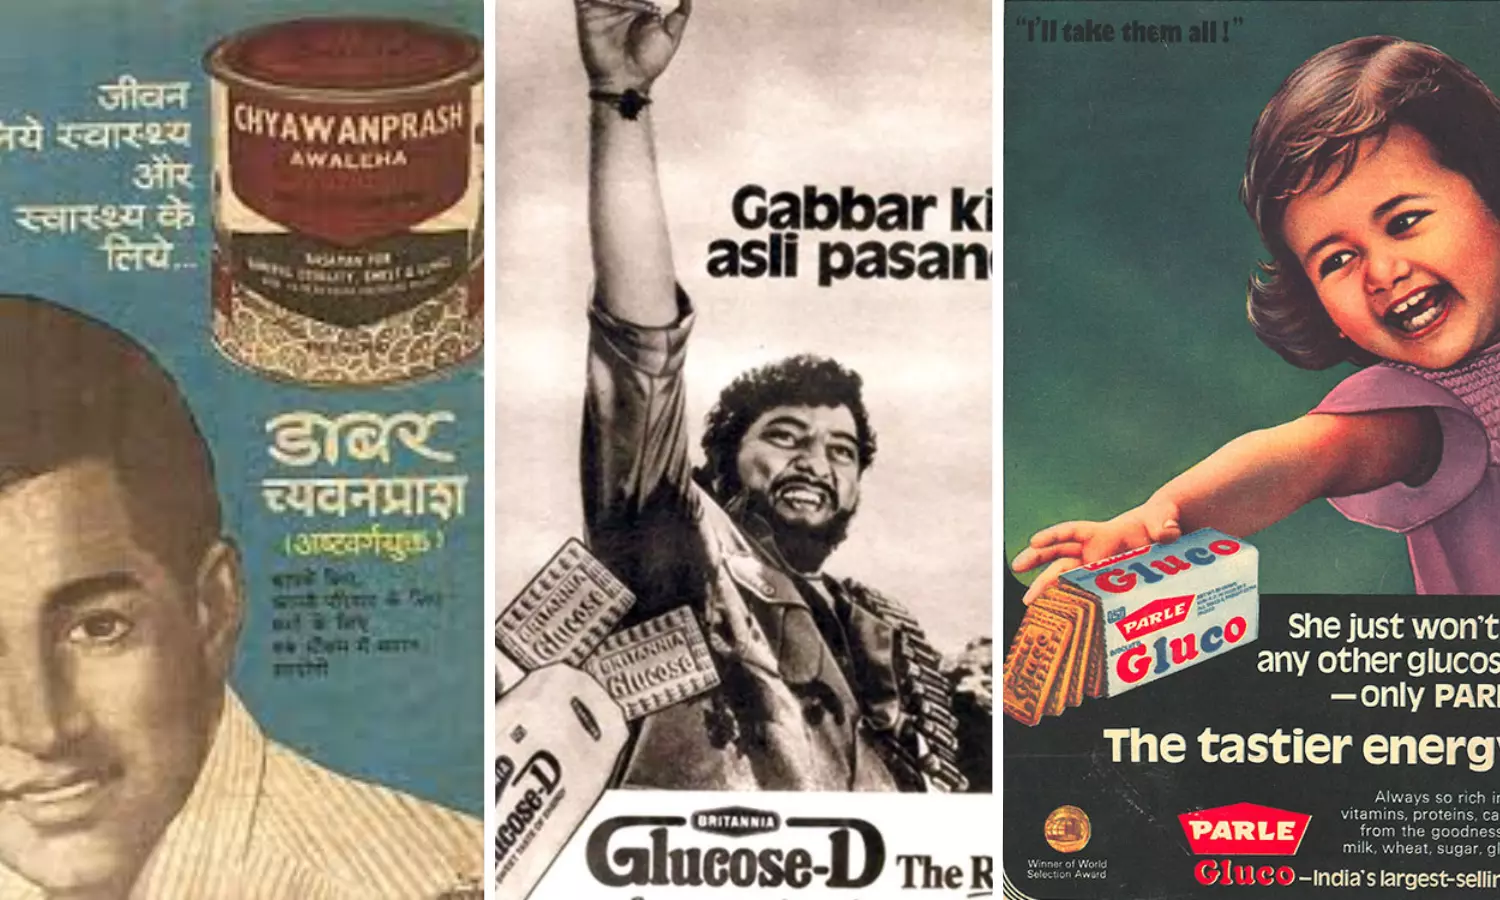 5 Indian Food Brands That Defined Taste and Tradition